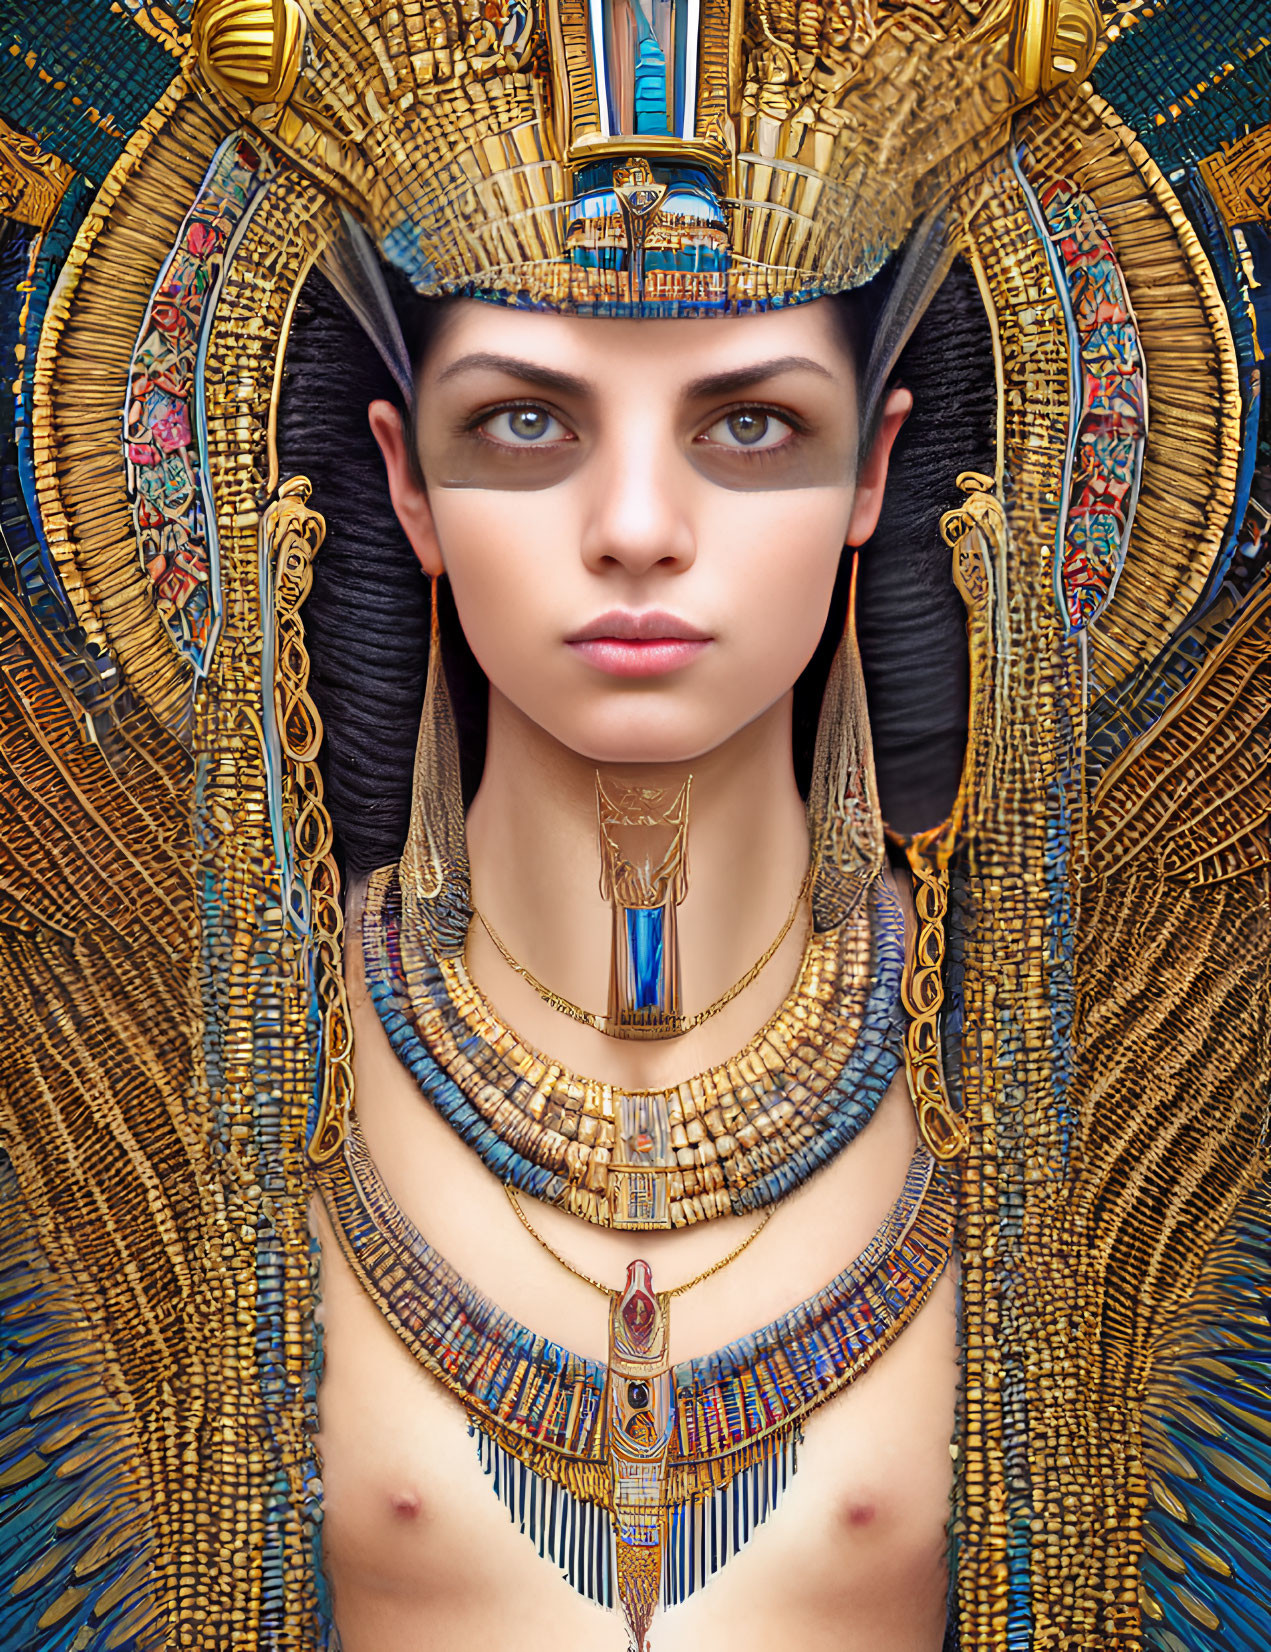 Detailed portrayal of woman in ancient Egyptian royal attire with headdress and jewelry